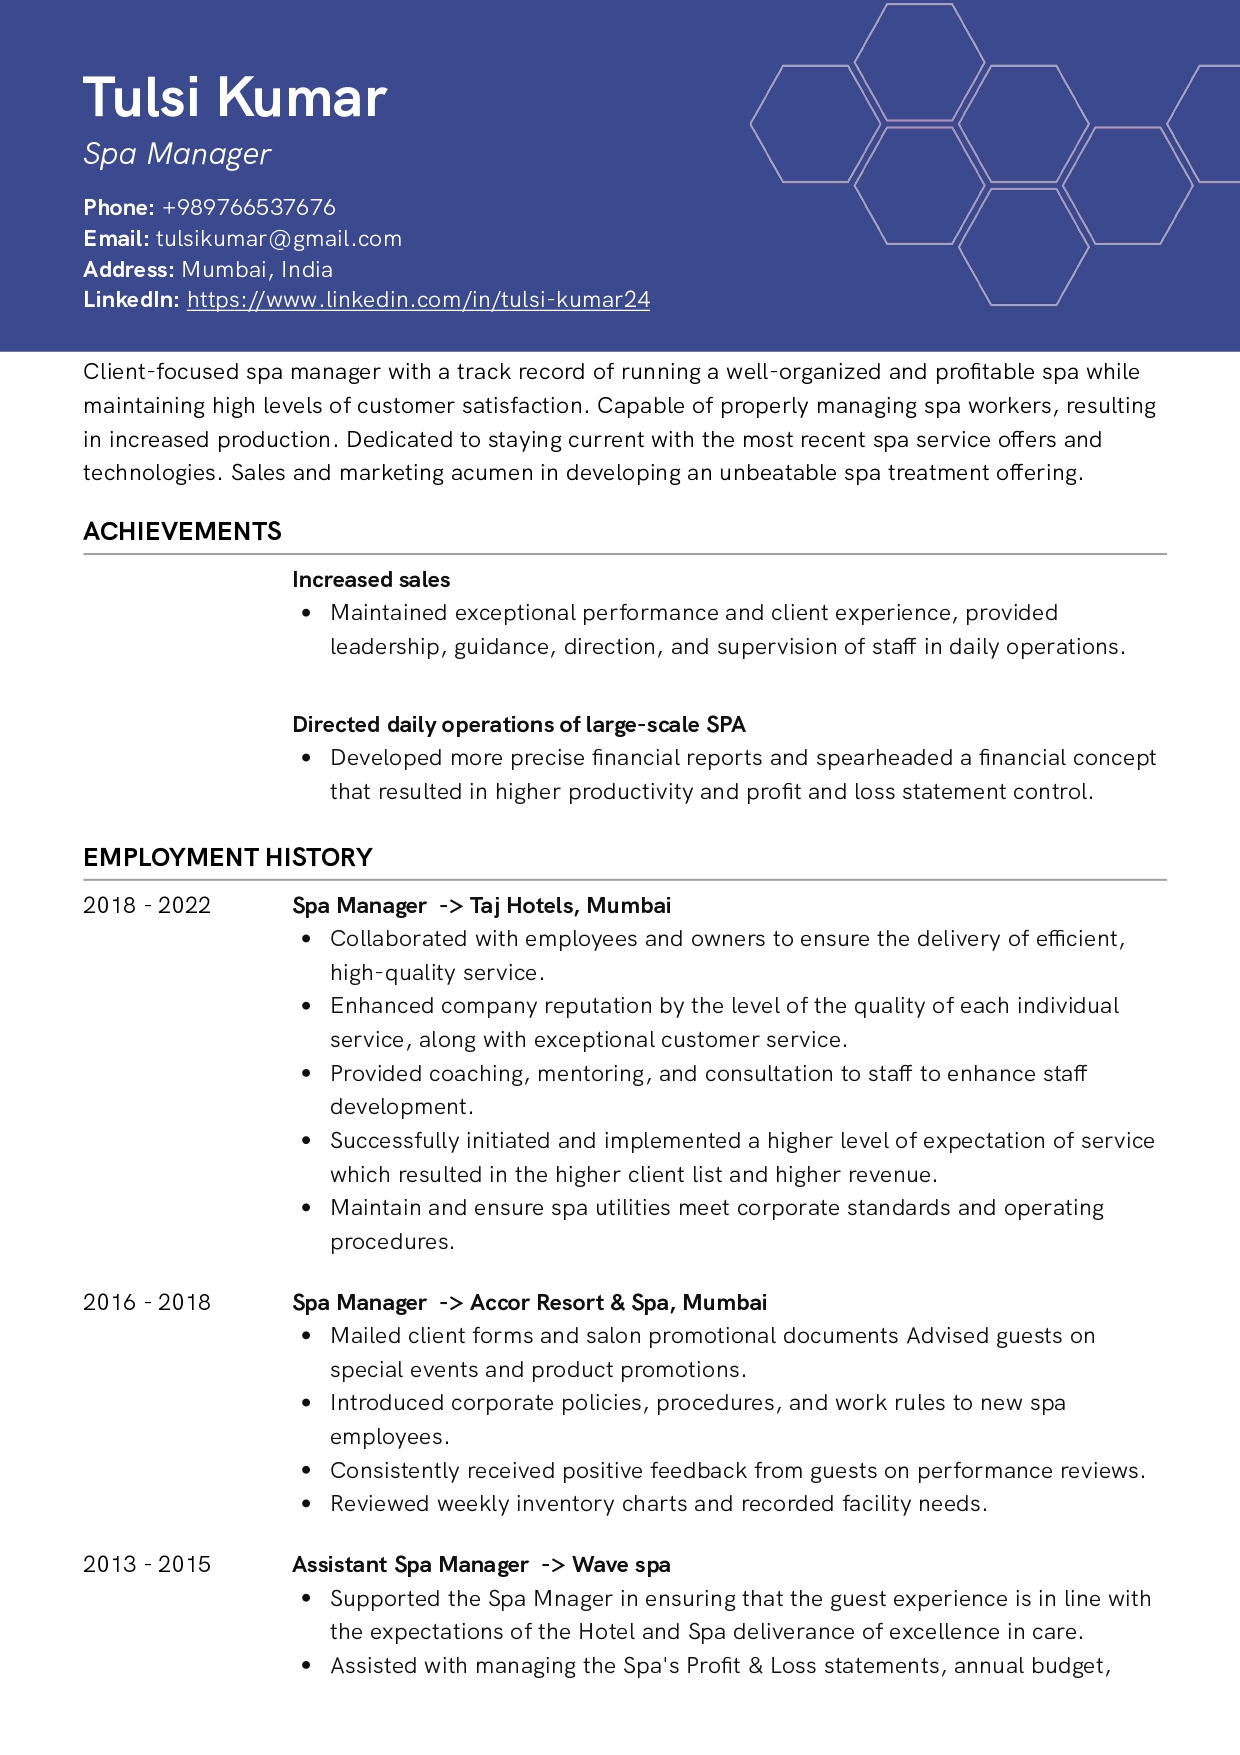 Sample Resume of Spa Manager | Free Resume Templates & Samples on Resumod.co